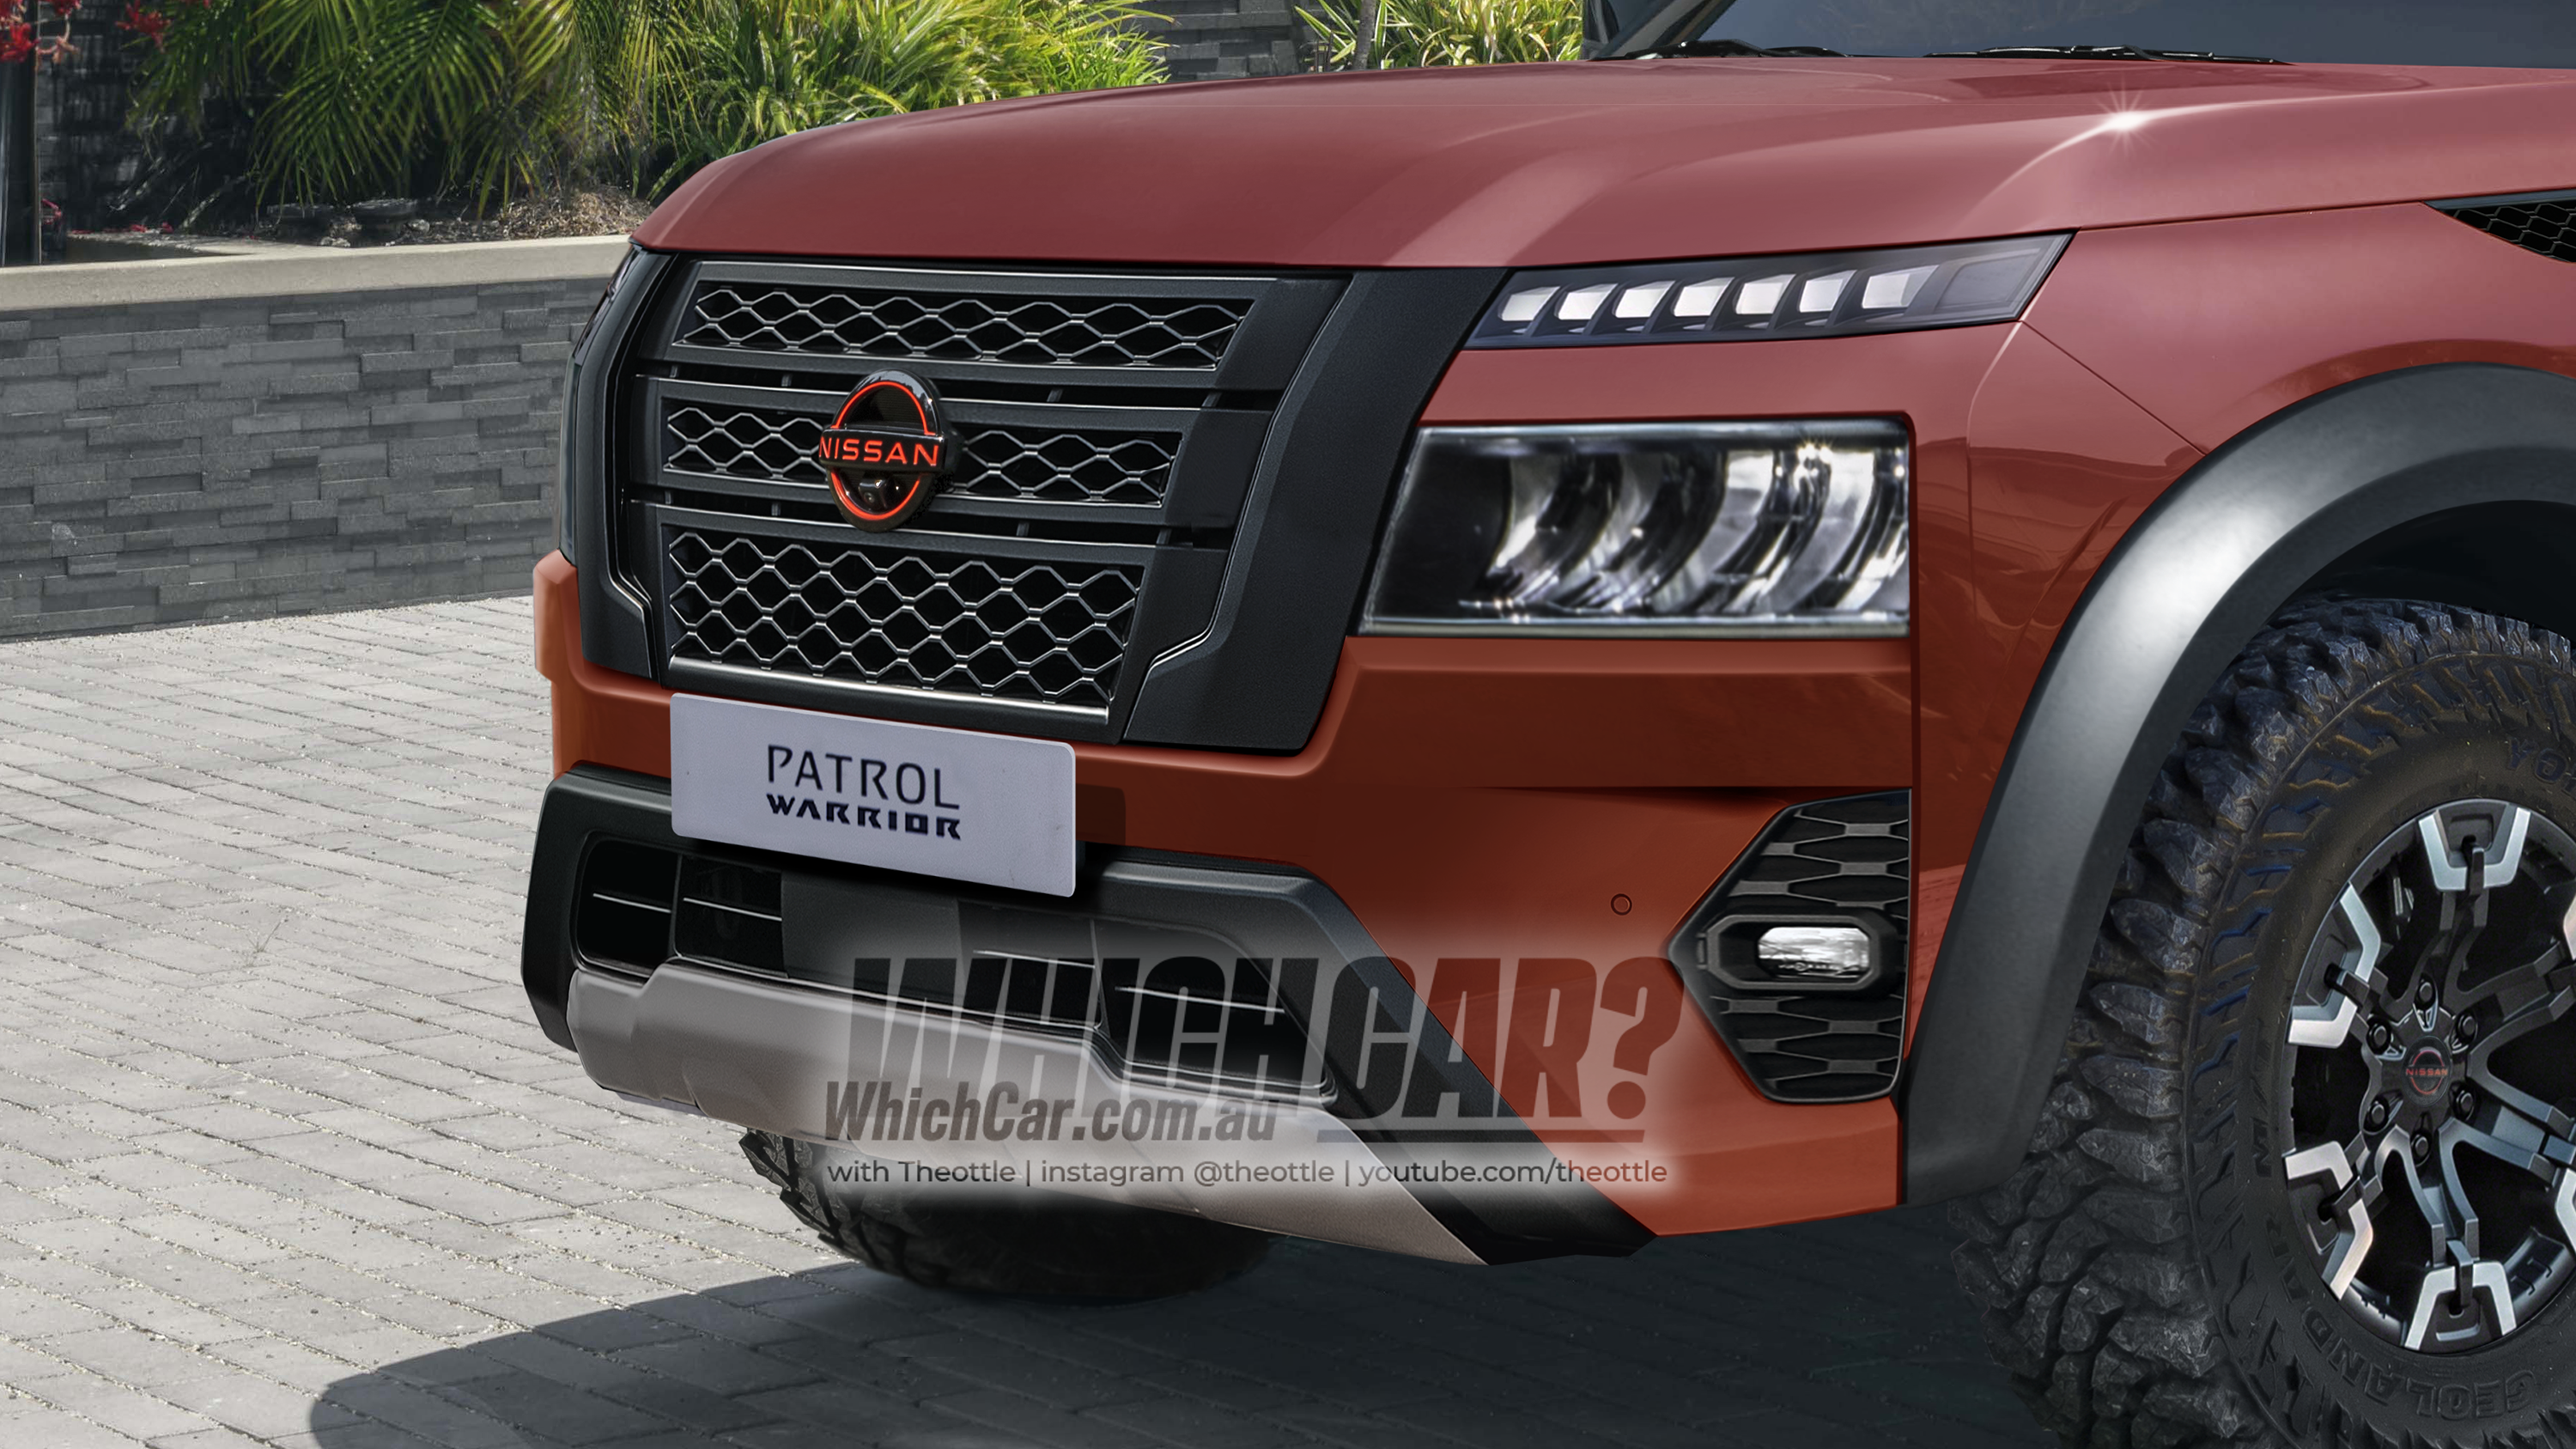 f90e22c7/2025 nissan patrol warrior imagined whichcar australia theottle 01 copy png